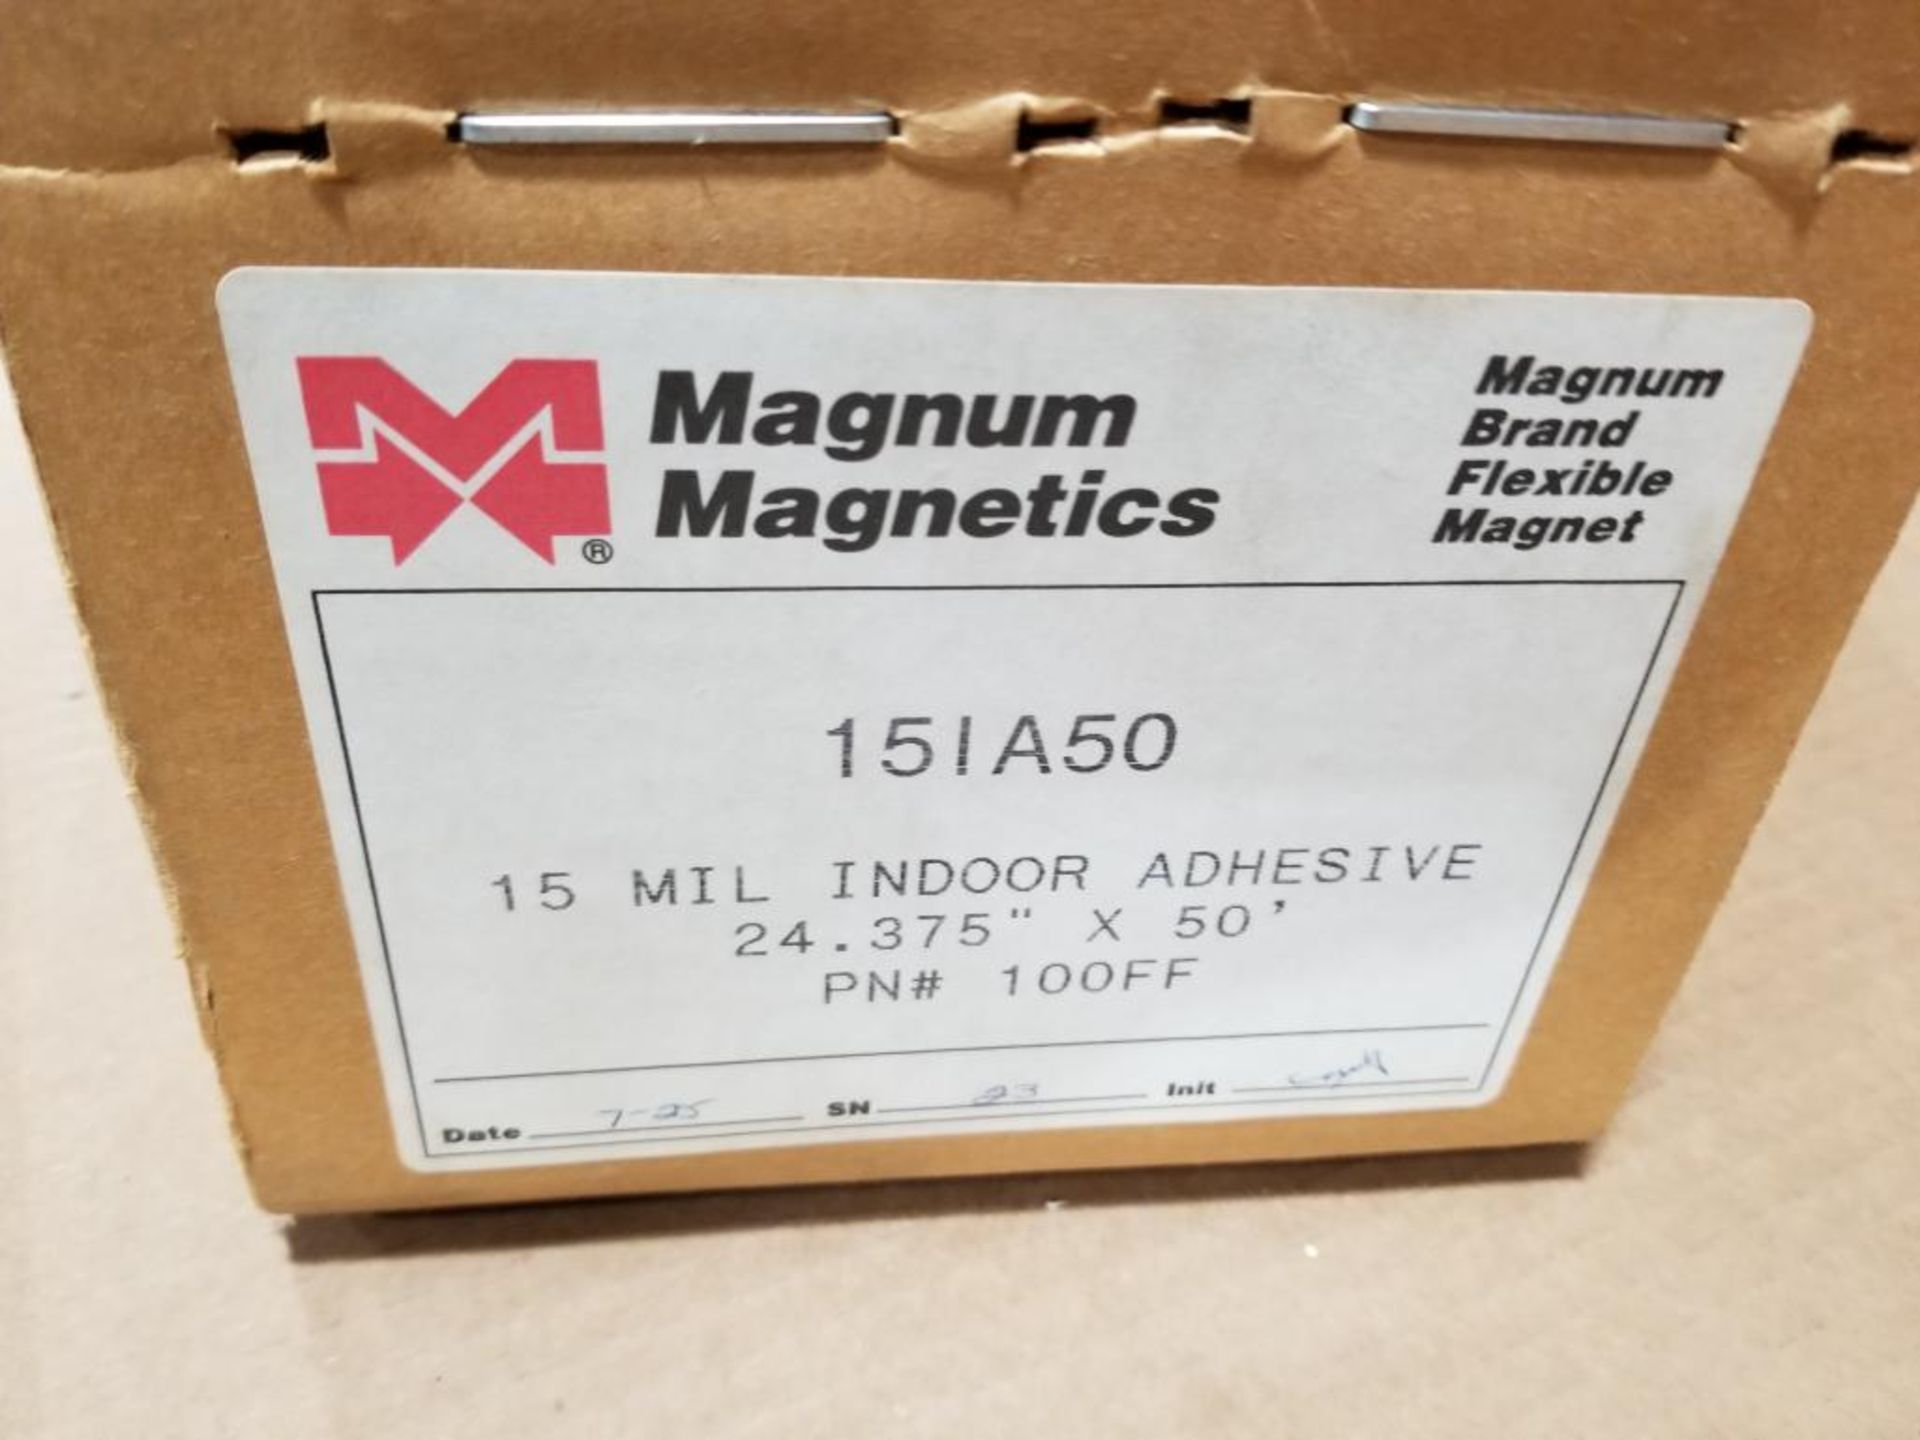 50ft - Magnum Magnetics sheeting roll. 15mil indoor adhesive. 24.375in x 50ft. Part # 15IA50. - Image 3 of 3